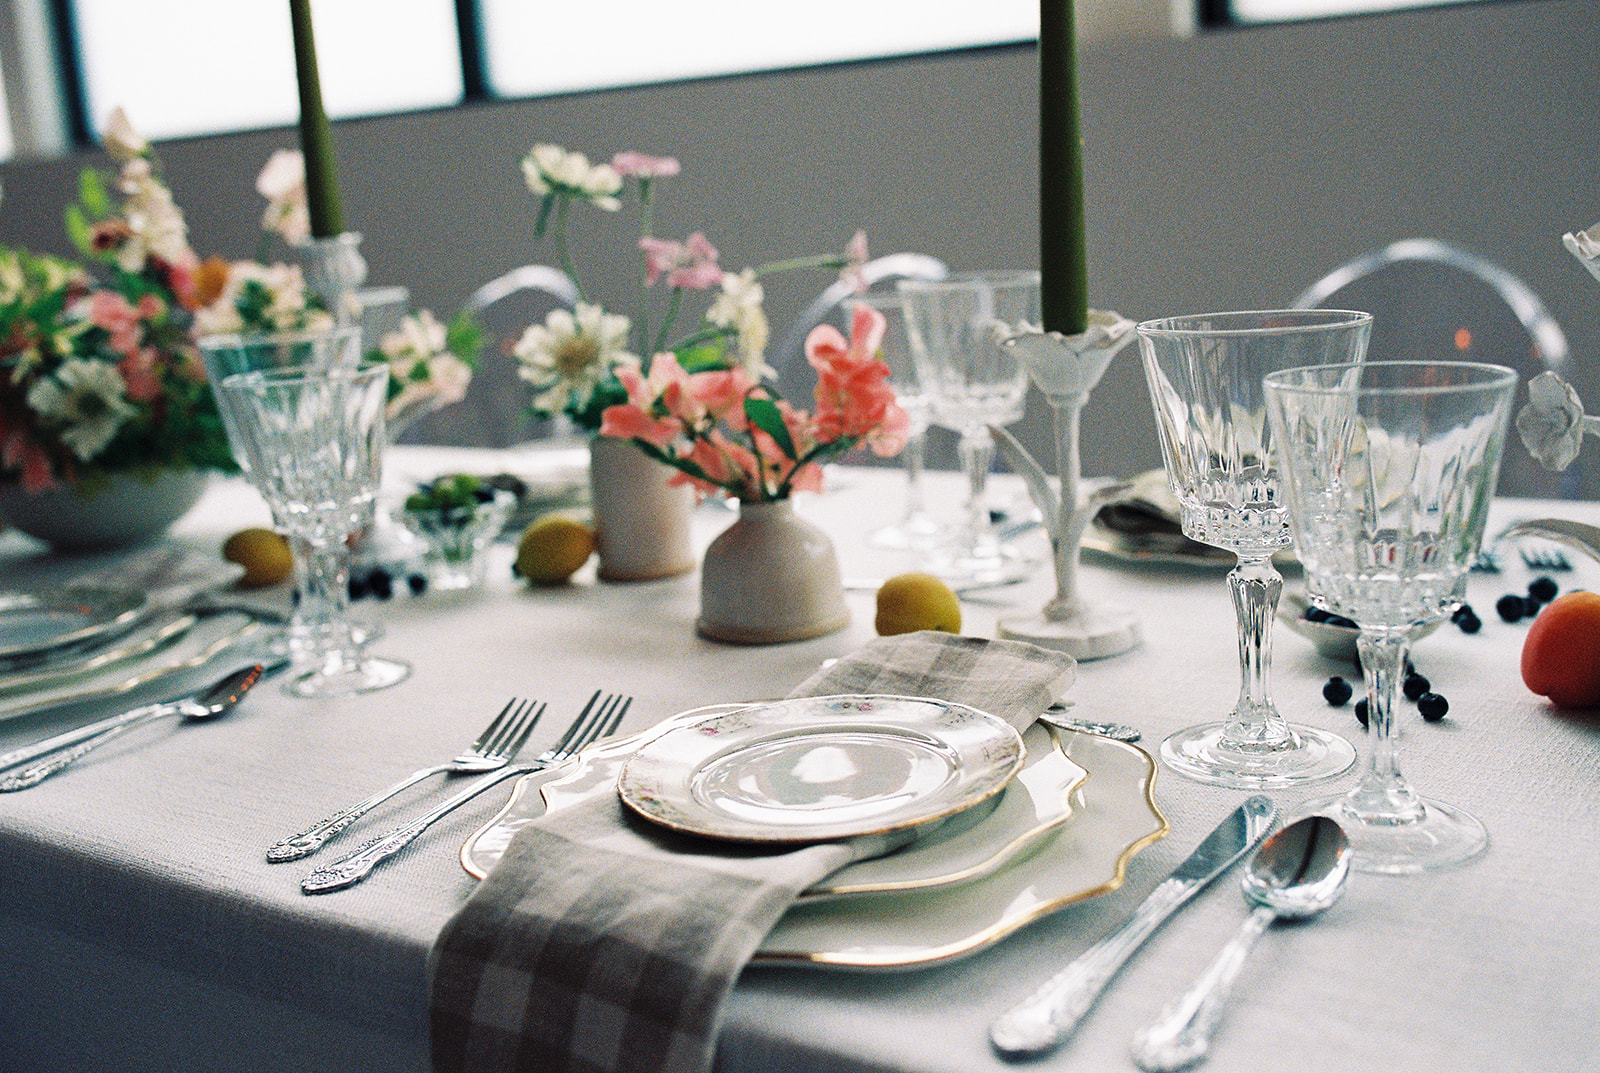 A garden party wedding tablescape featuring crystal glassware, bright florals, and vintage place settings on film.